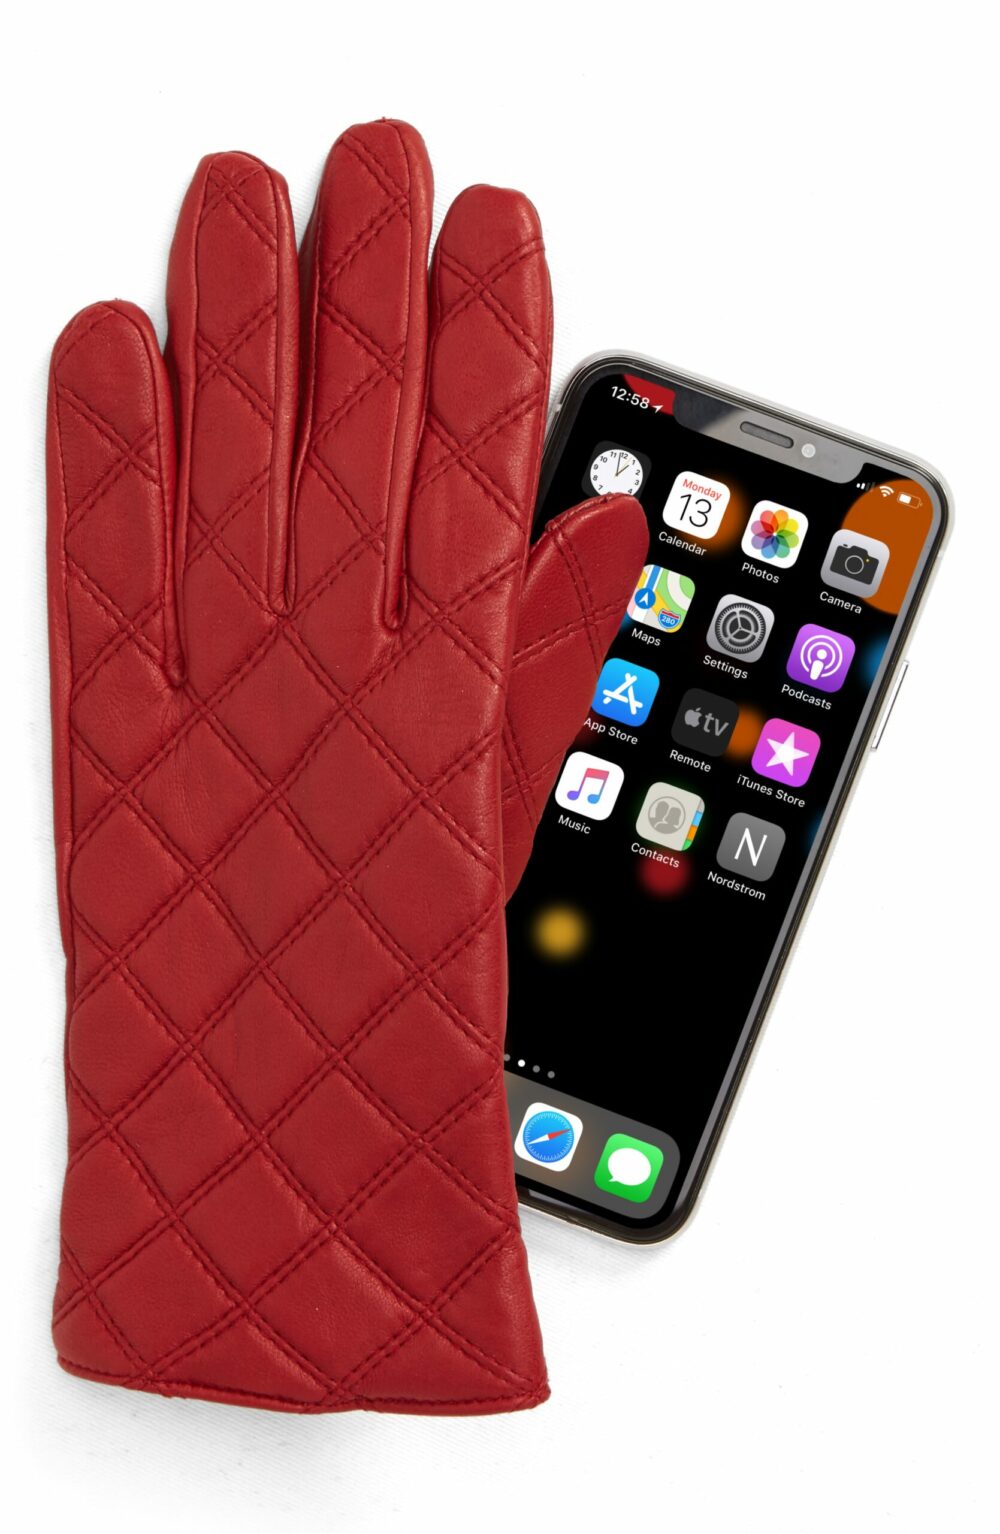 Touchscreen Gloves Keep You Stylish And Toasty While Texting